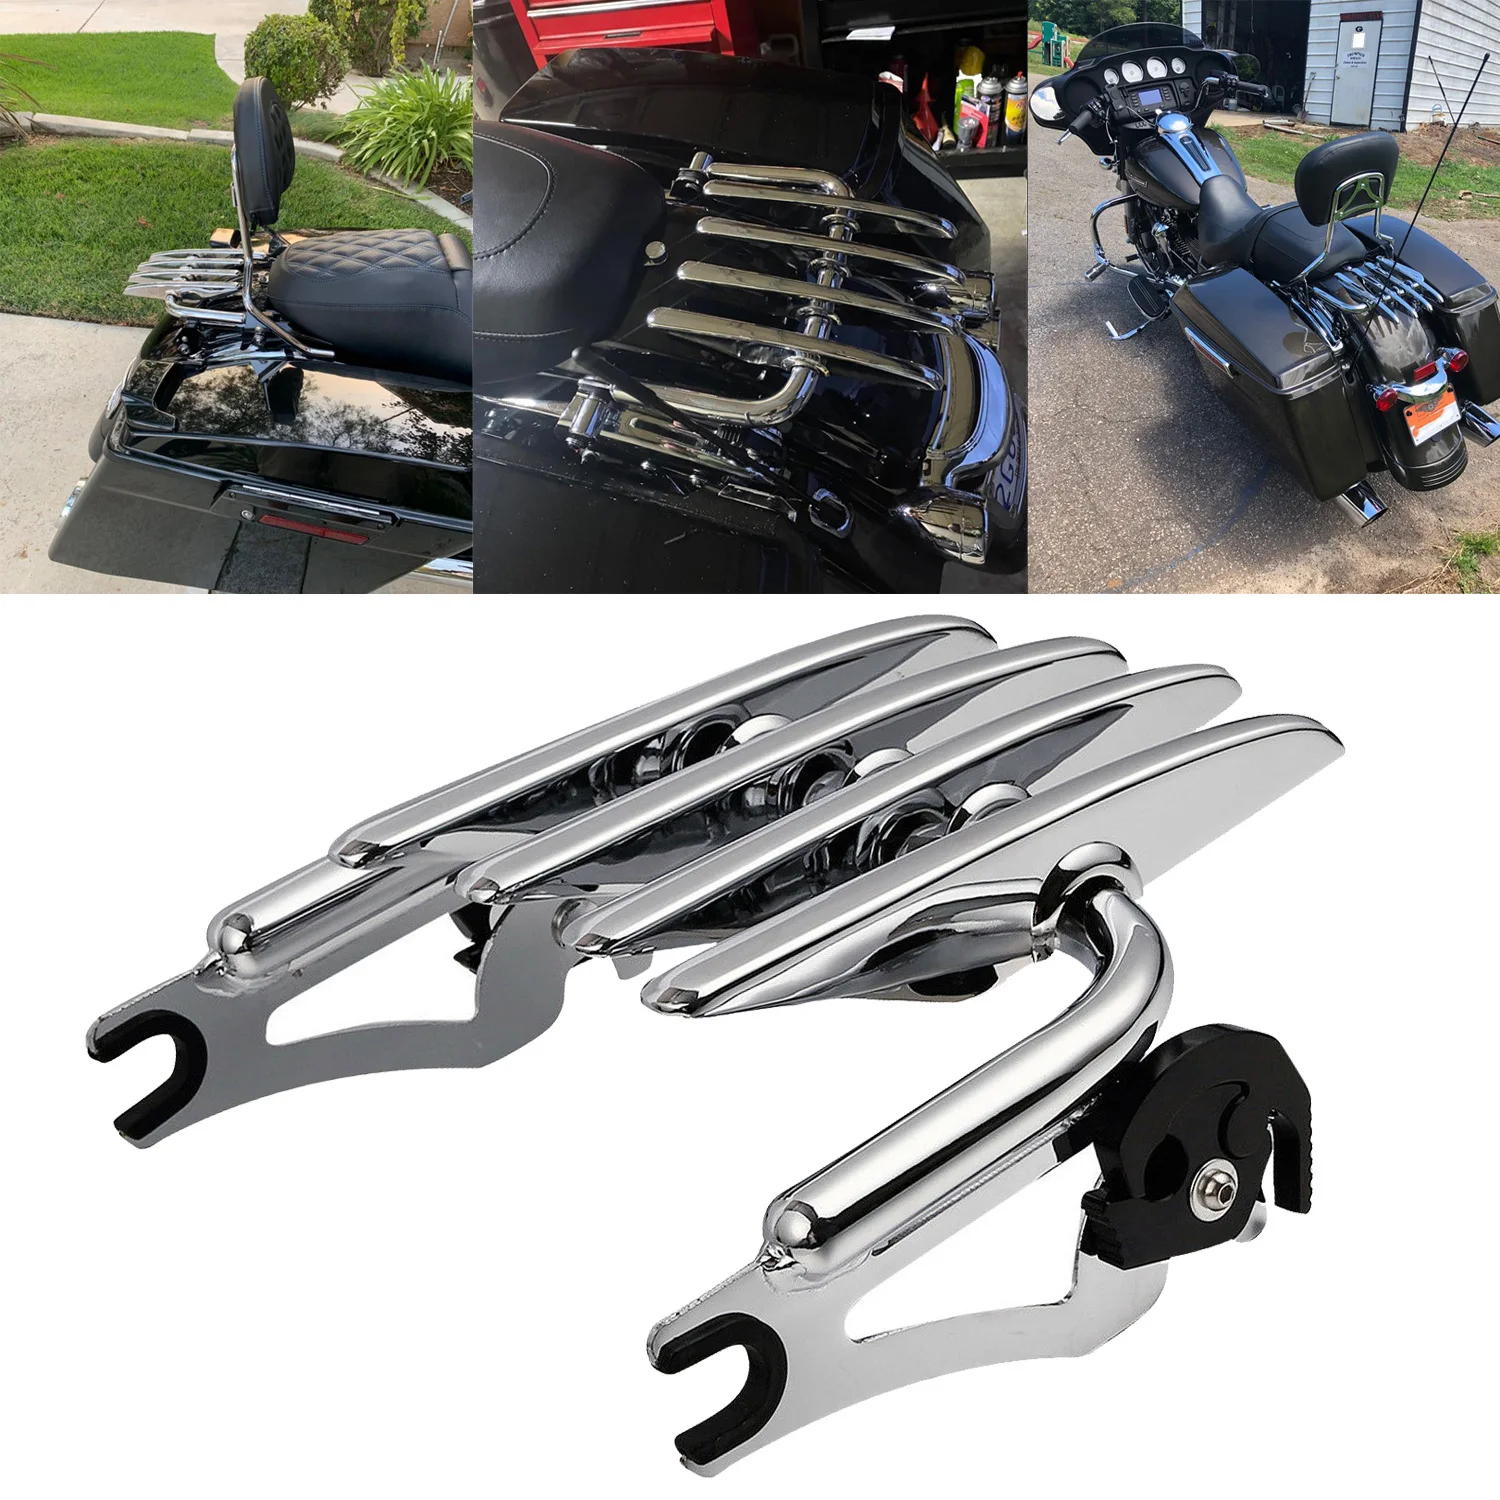 Chrome Detachable Two-Up Stealth Mounting Luggage Rack For Harley Touring Street Electra Glide Road King FLHT FLHX 2009-2023 motorcycle chrome black saddle bag latch cover face for harley touring street glide flhx road king1993 2013